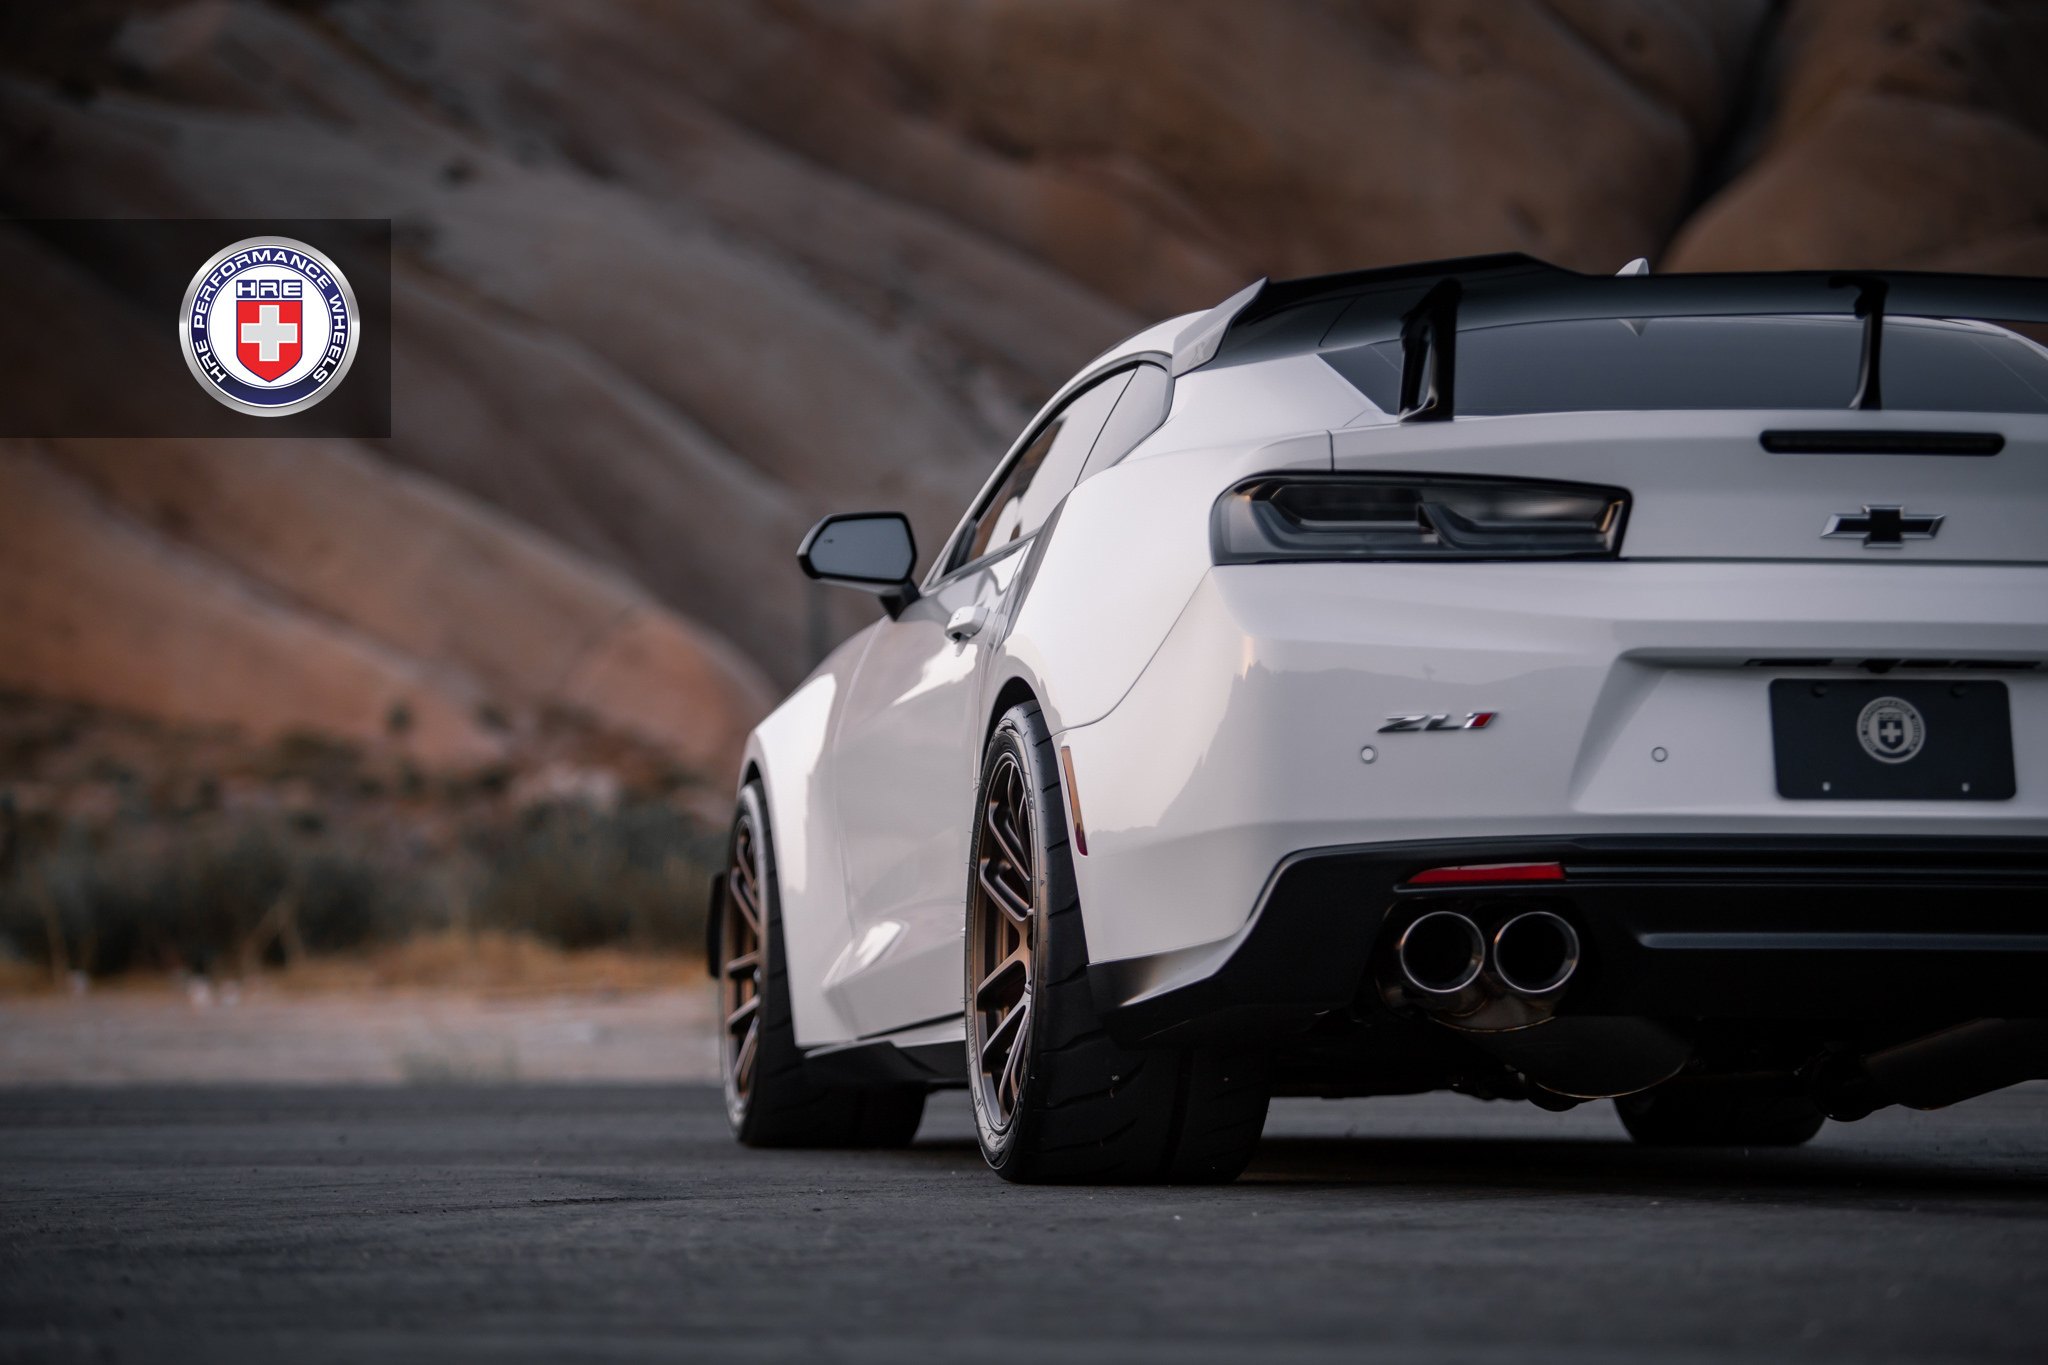 Aftermarket Rear Diffuser on White Chevy Camaro ZL1 - Photo by HRE Wheels